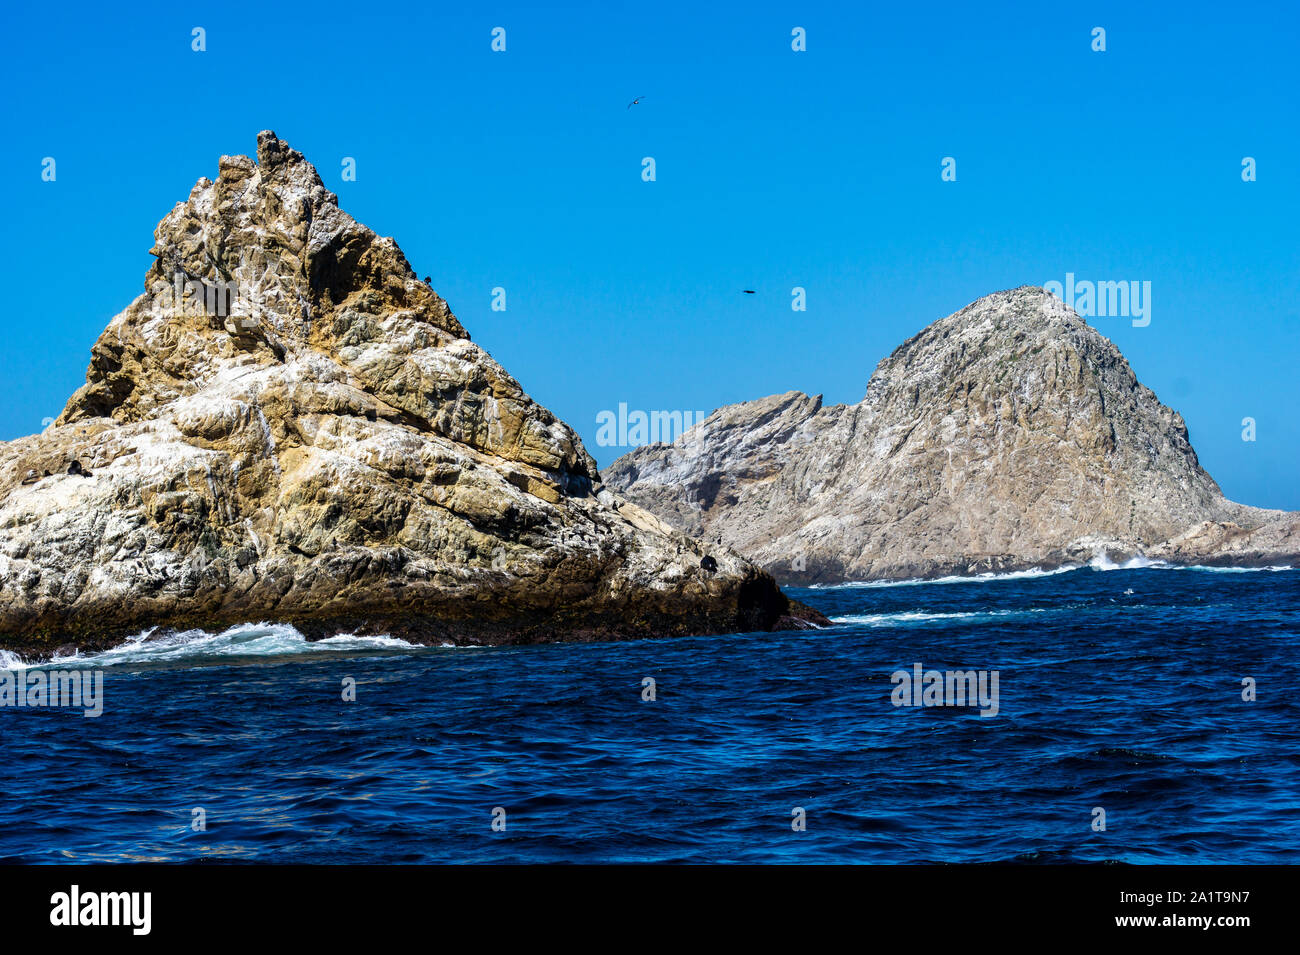 White and yellow rock sticking out of the wild and wavy ocean like a devil's tooth at the Farallon islands, shaped like a monster. Stock Photo